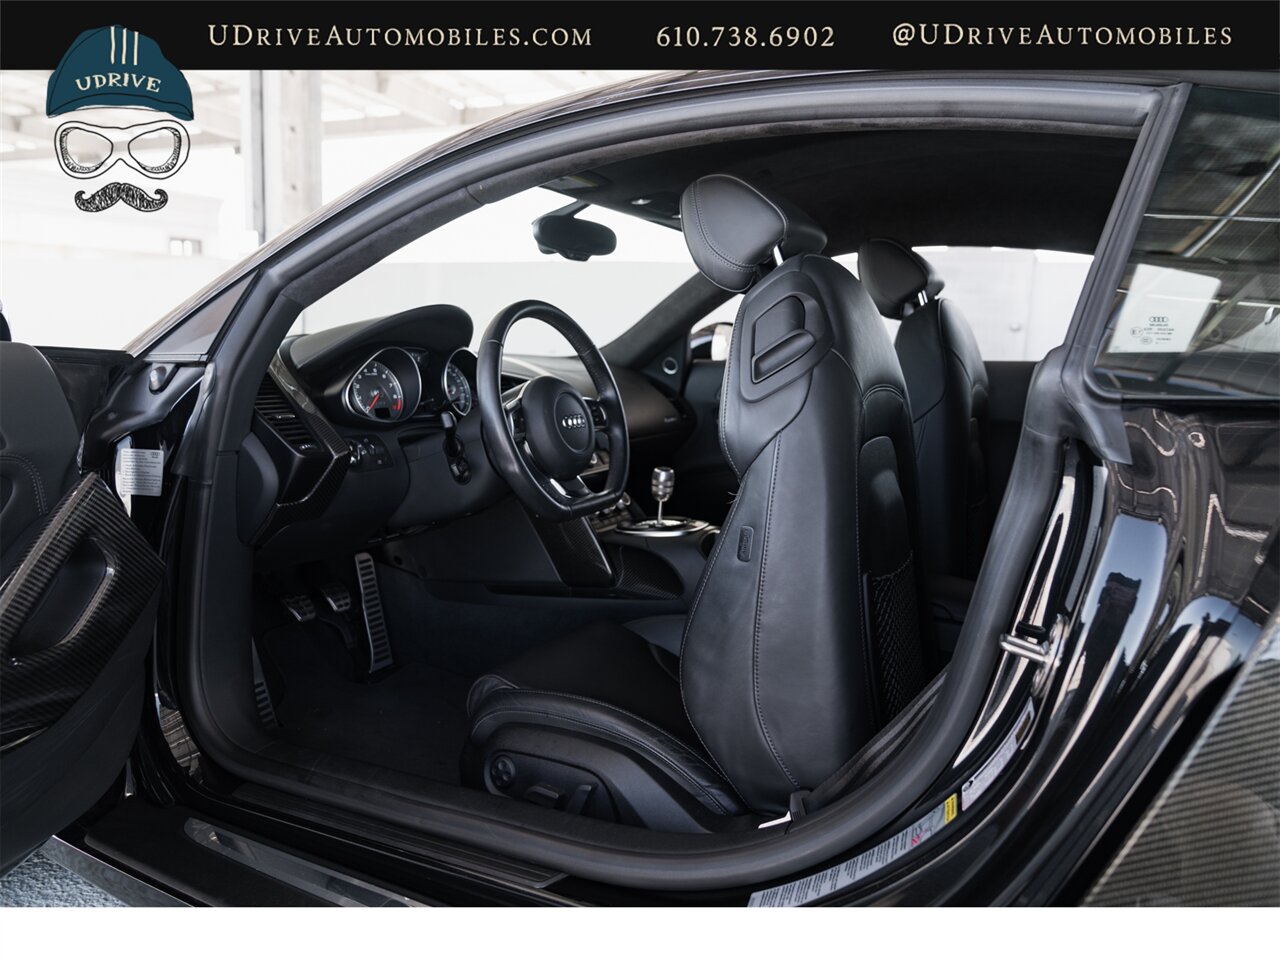 2009 Audi R8 Quattro  4.2L V8 6 Speed Manual - Photo 46 - West Chester, PA 19382